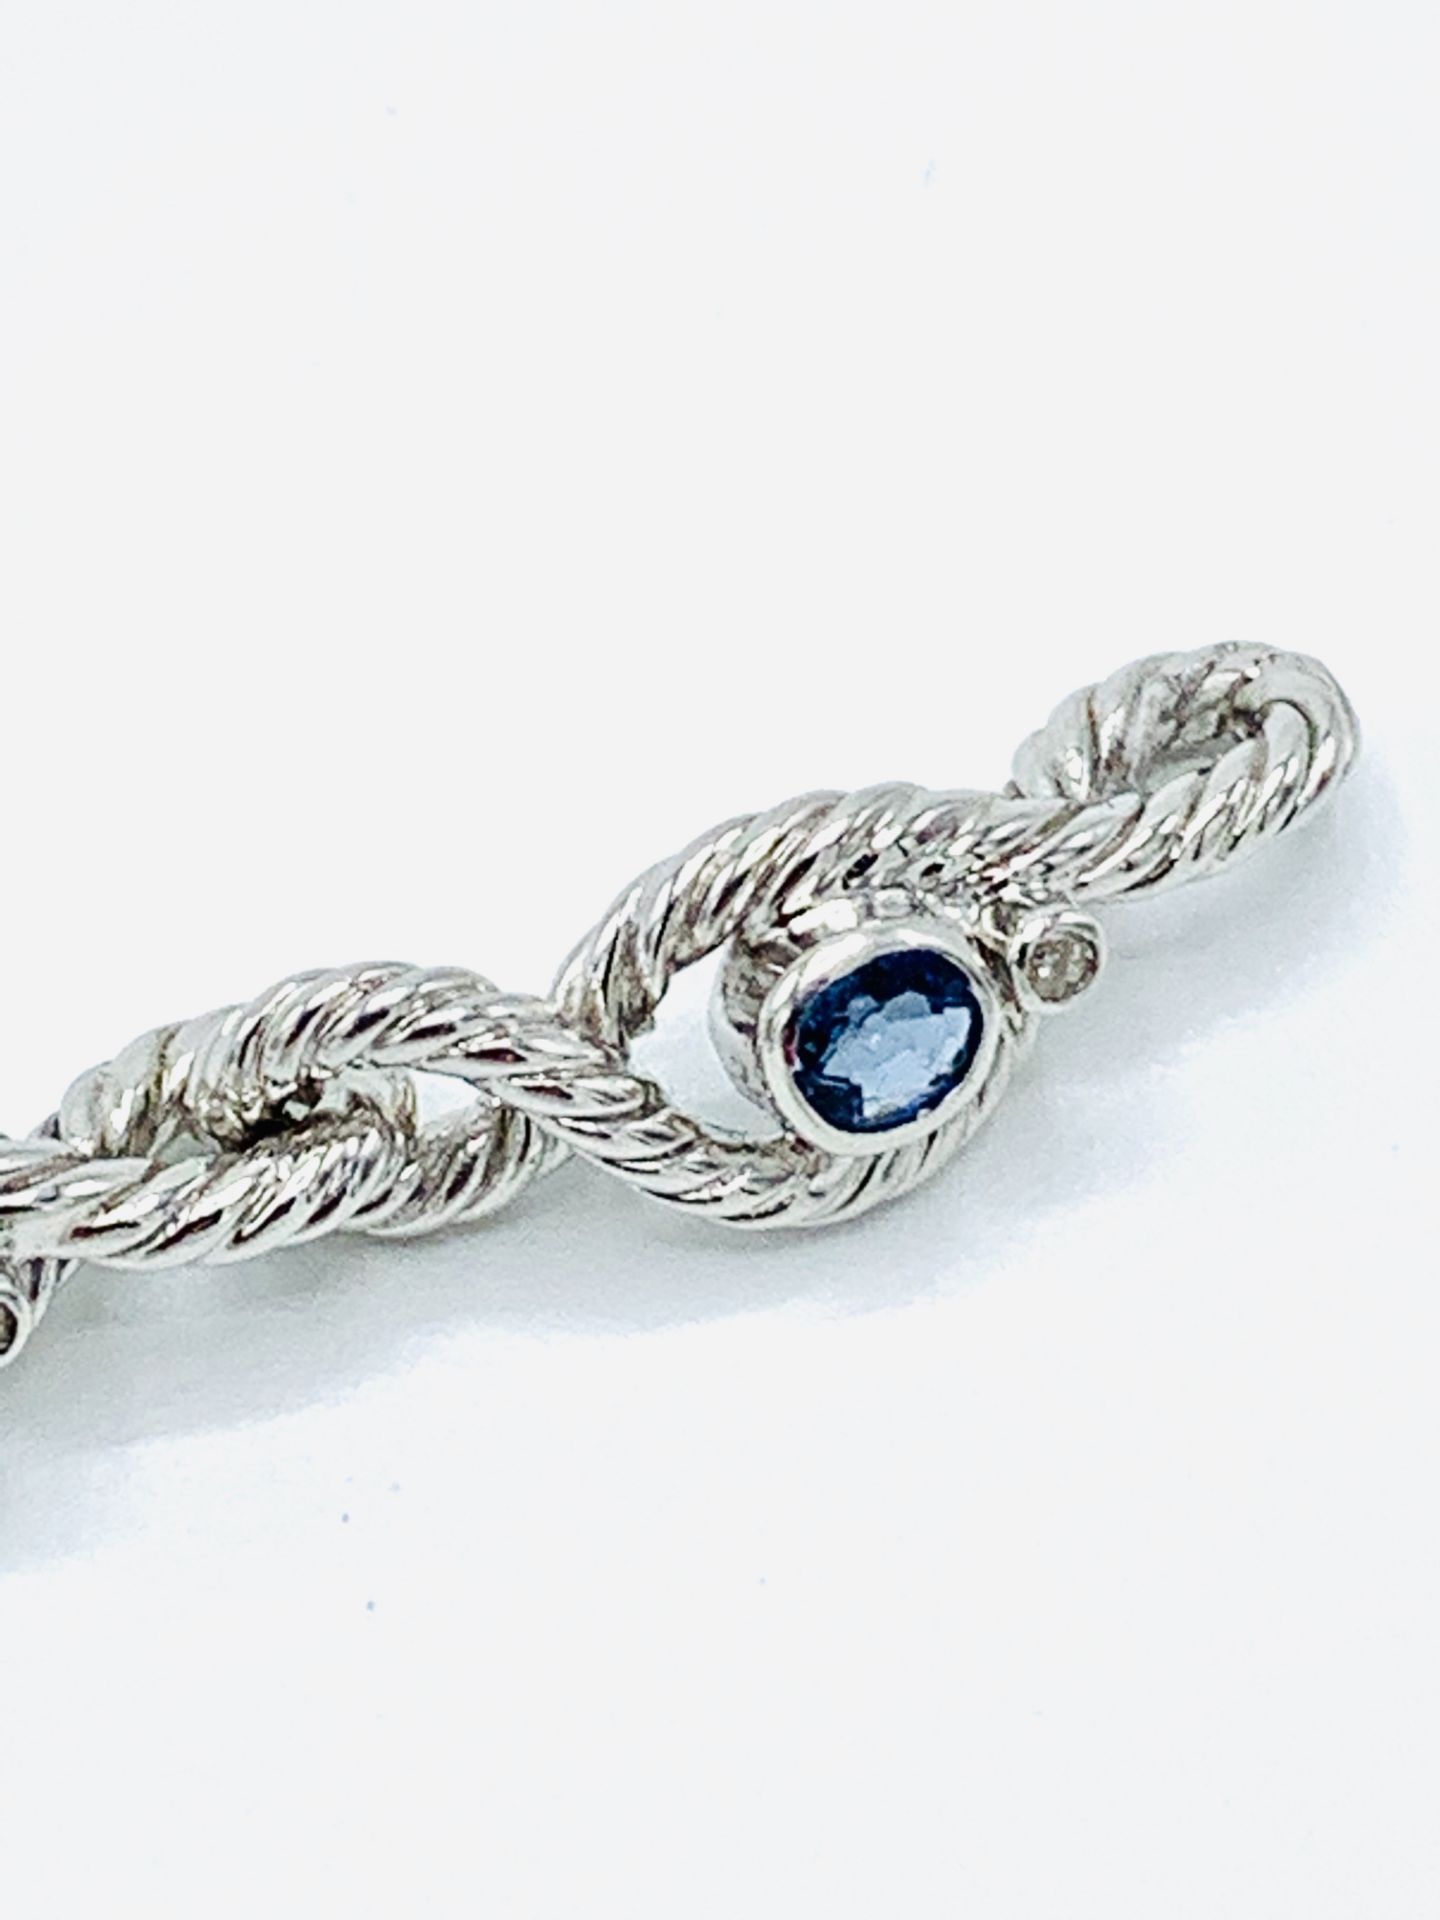 18ct white gold and graduated sapphire twisted bracelet. - Image 4 of 8